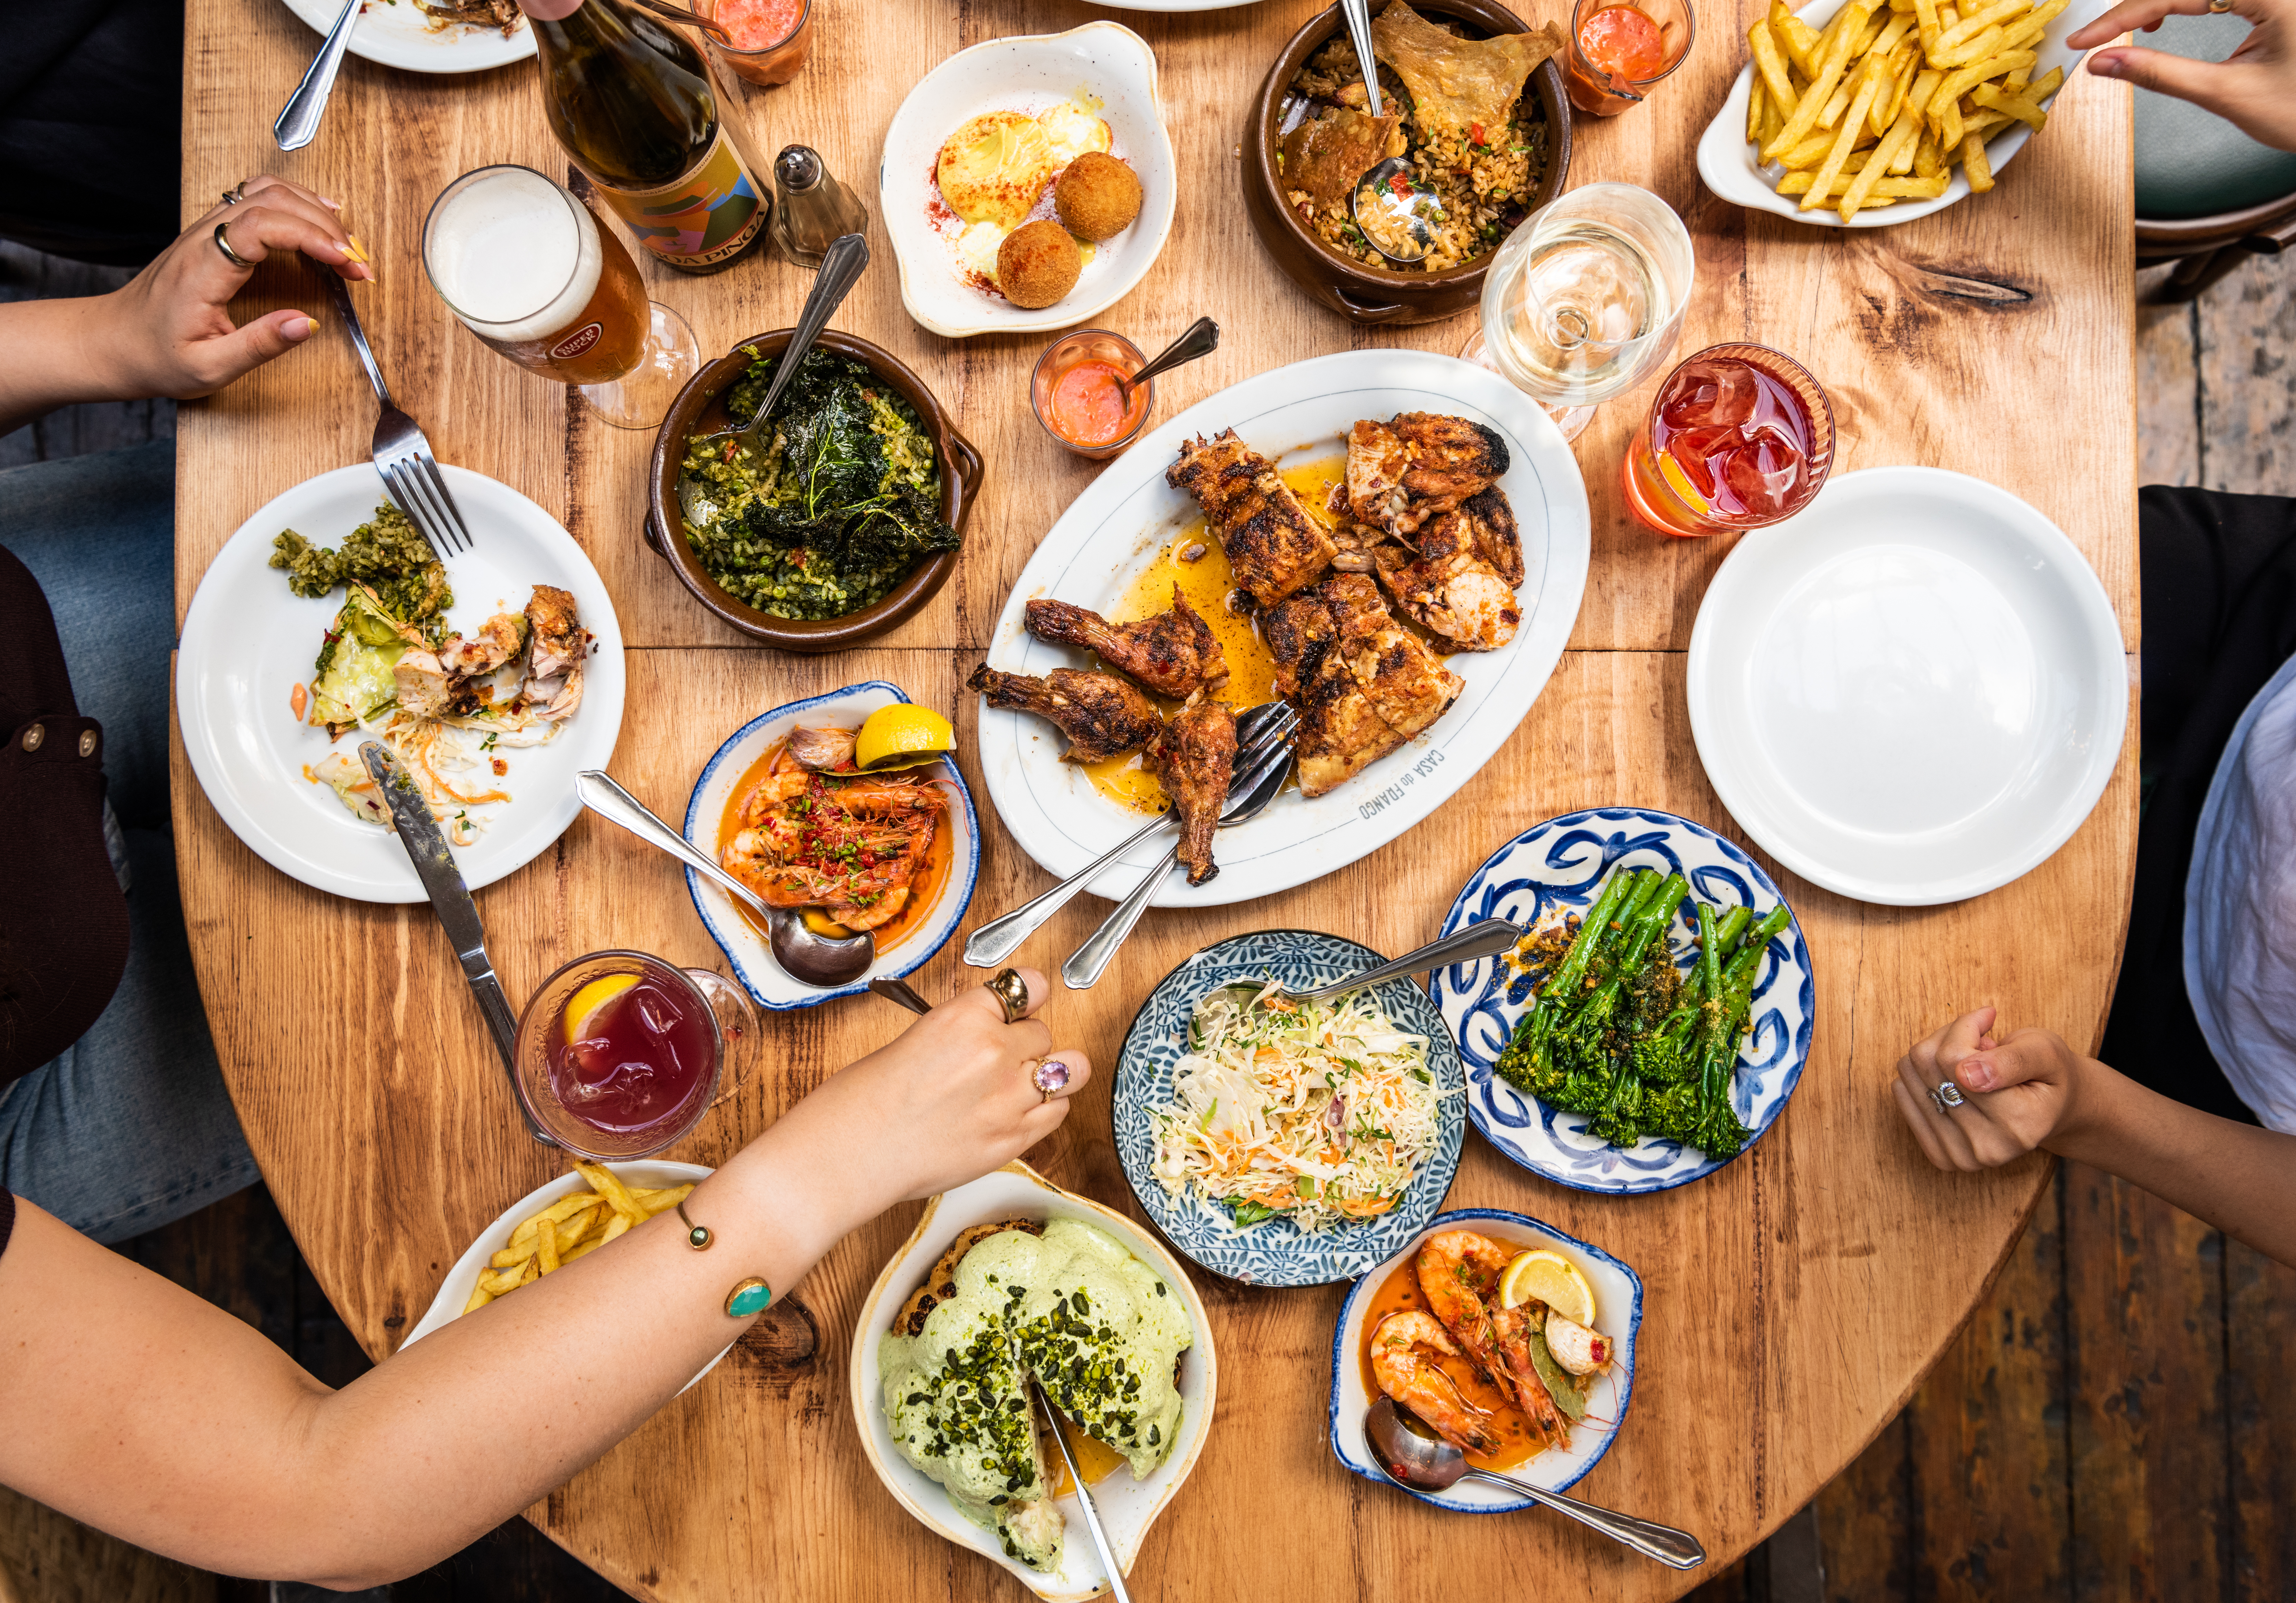 A birdseye shot of a wooden table full of food, including platters of piri piri chicken, grilled broccoli, croquettes, and chips, with people digging in.